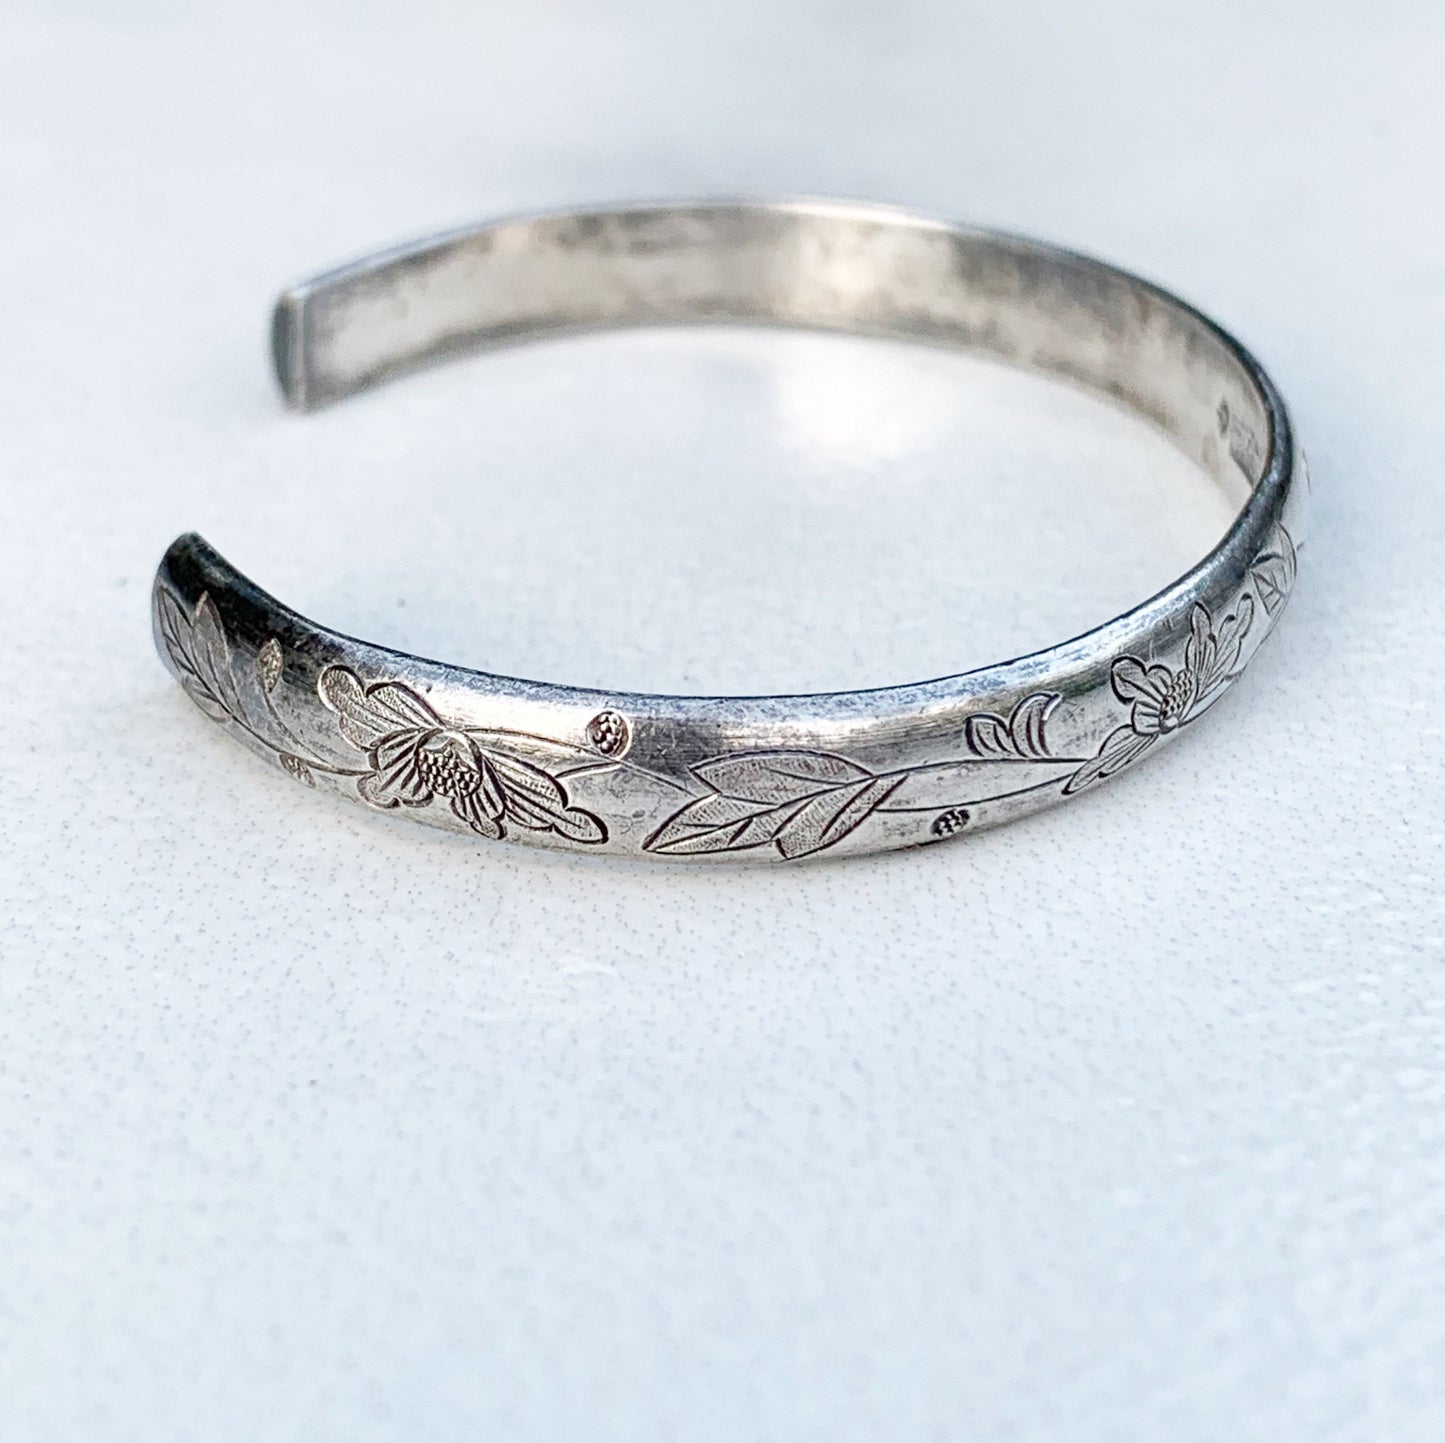 Antique Chinese Silver Cuff Bracelet | Chinese Engraved Wedding Cuff